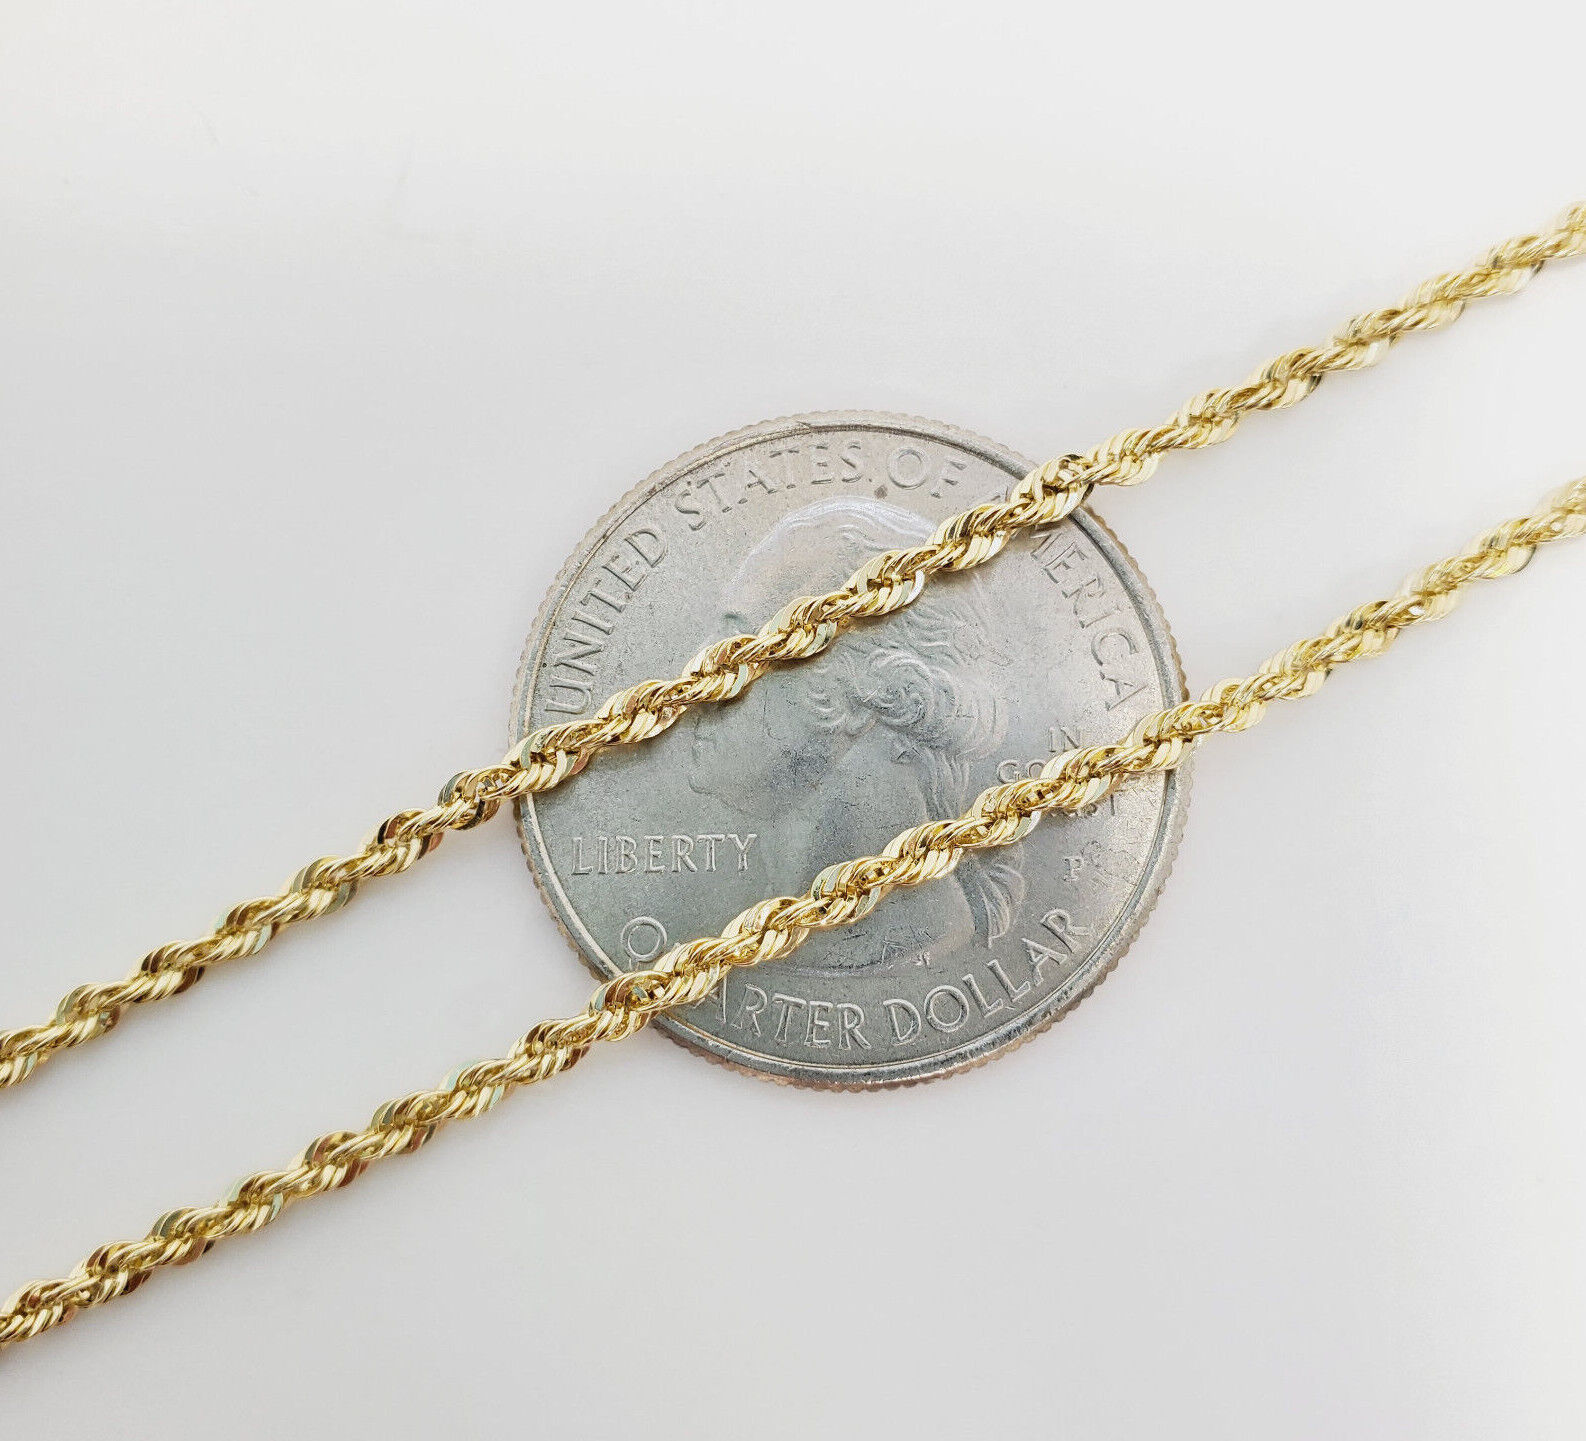 Real 10K Solid Yellow Gold 2mm-5mm Diamond Cut Rope Chain Necklace 16